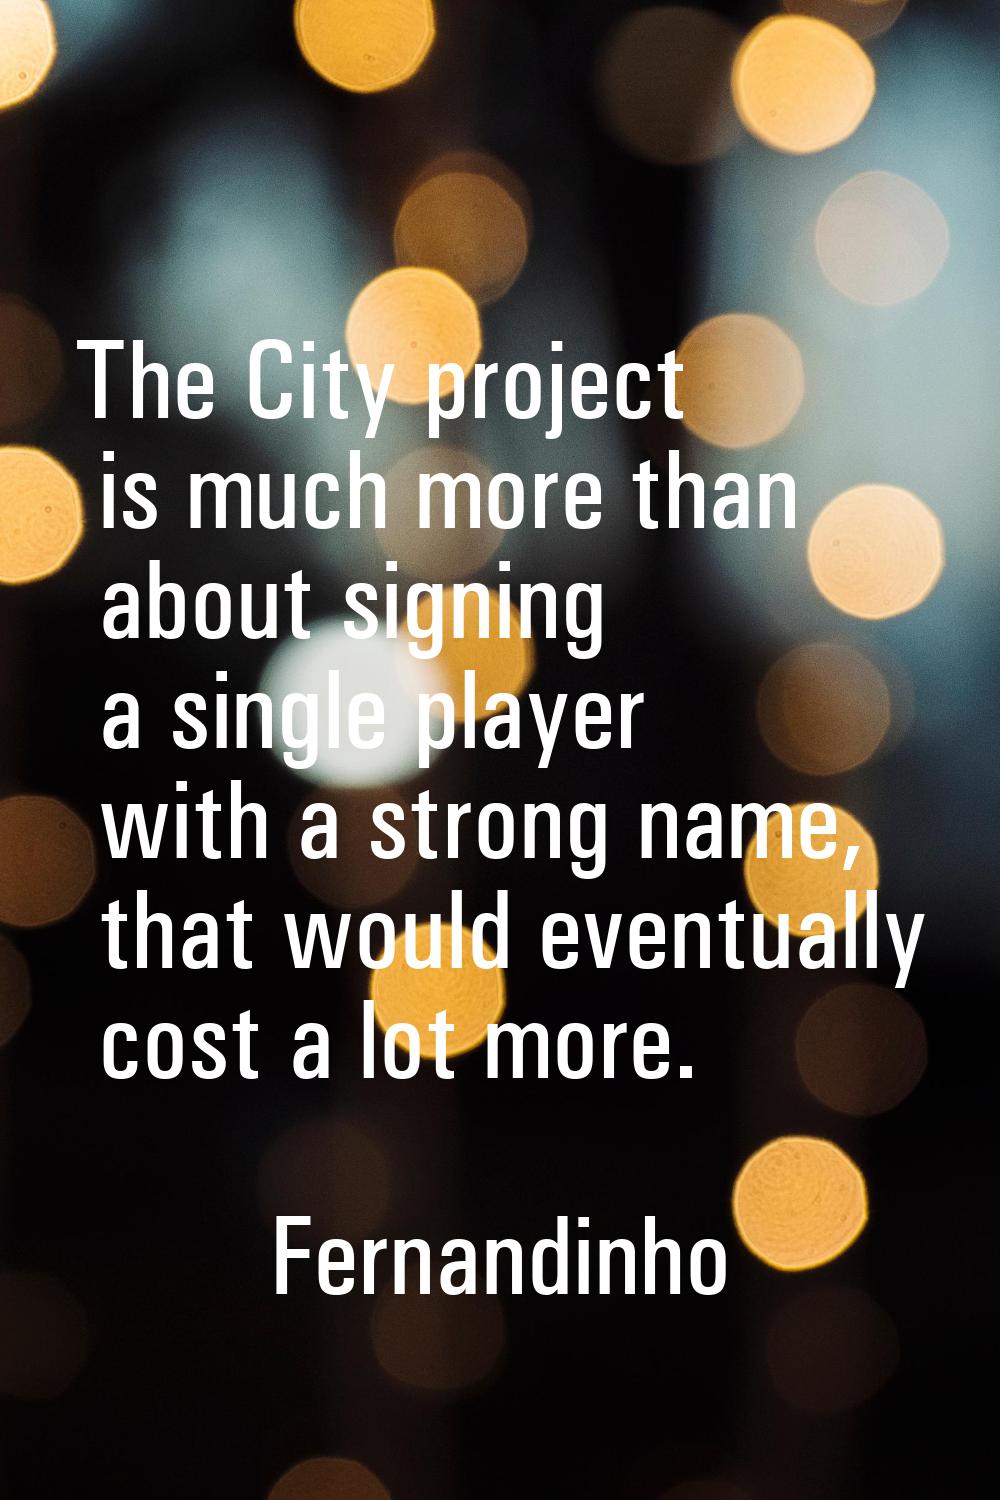 The City project is much more than about signing a single player with a strong name, that would eve